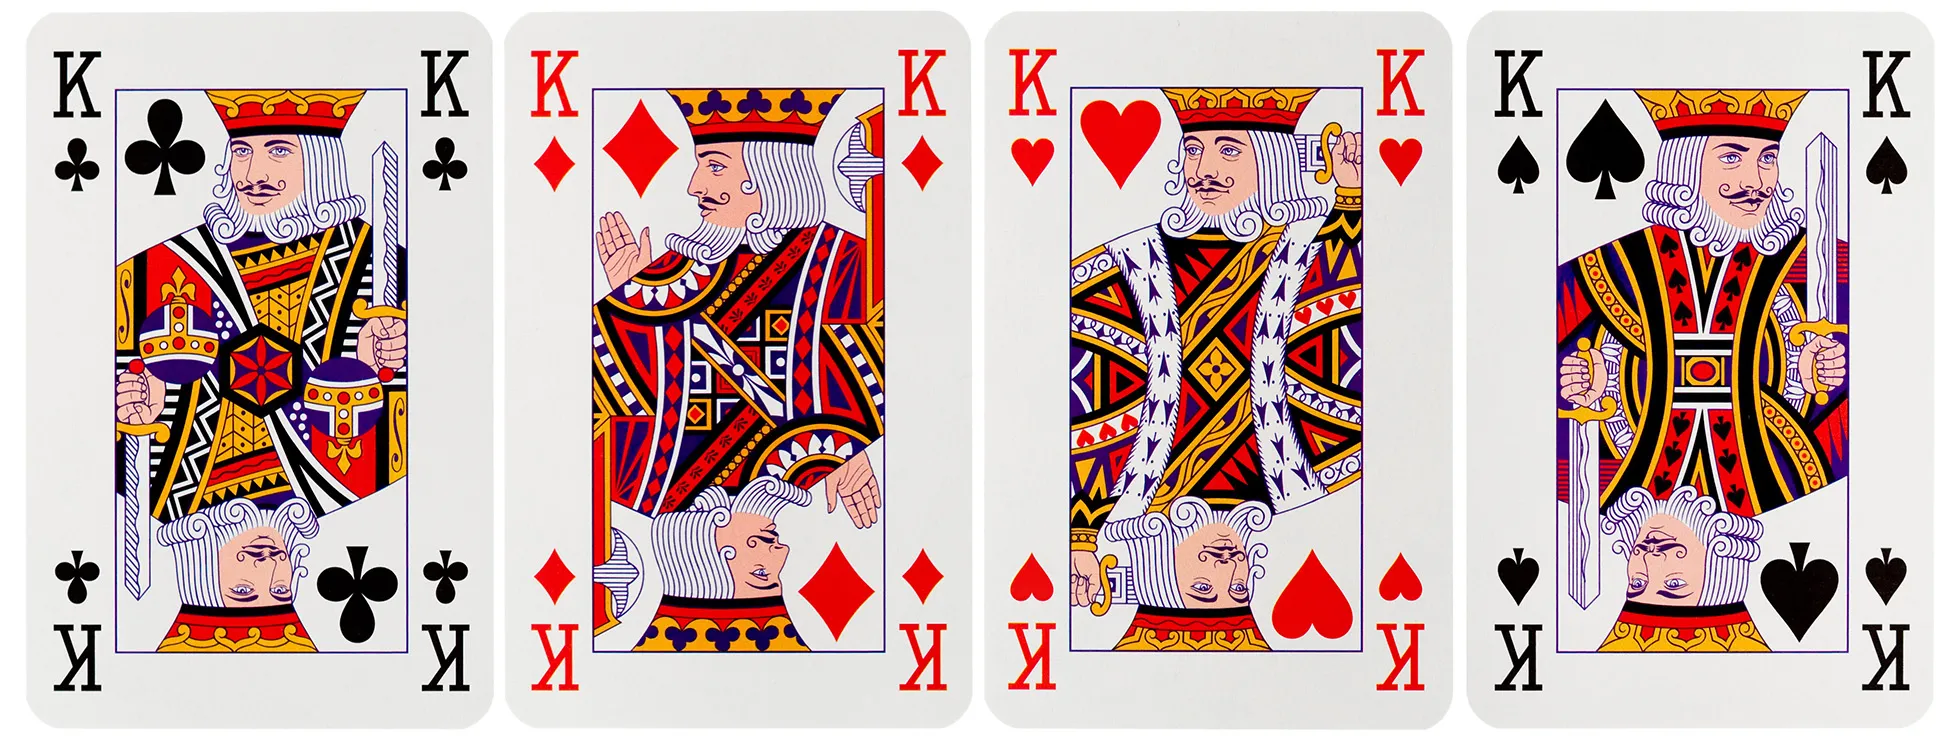 Four playing cards showing the Kings of the four suits, representing how visual regression testing can be used in website testing